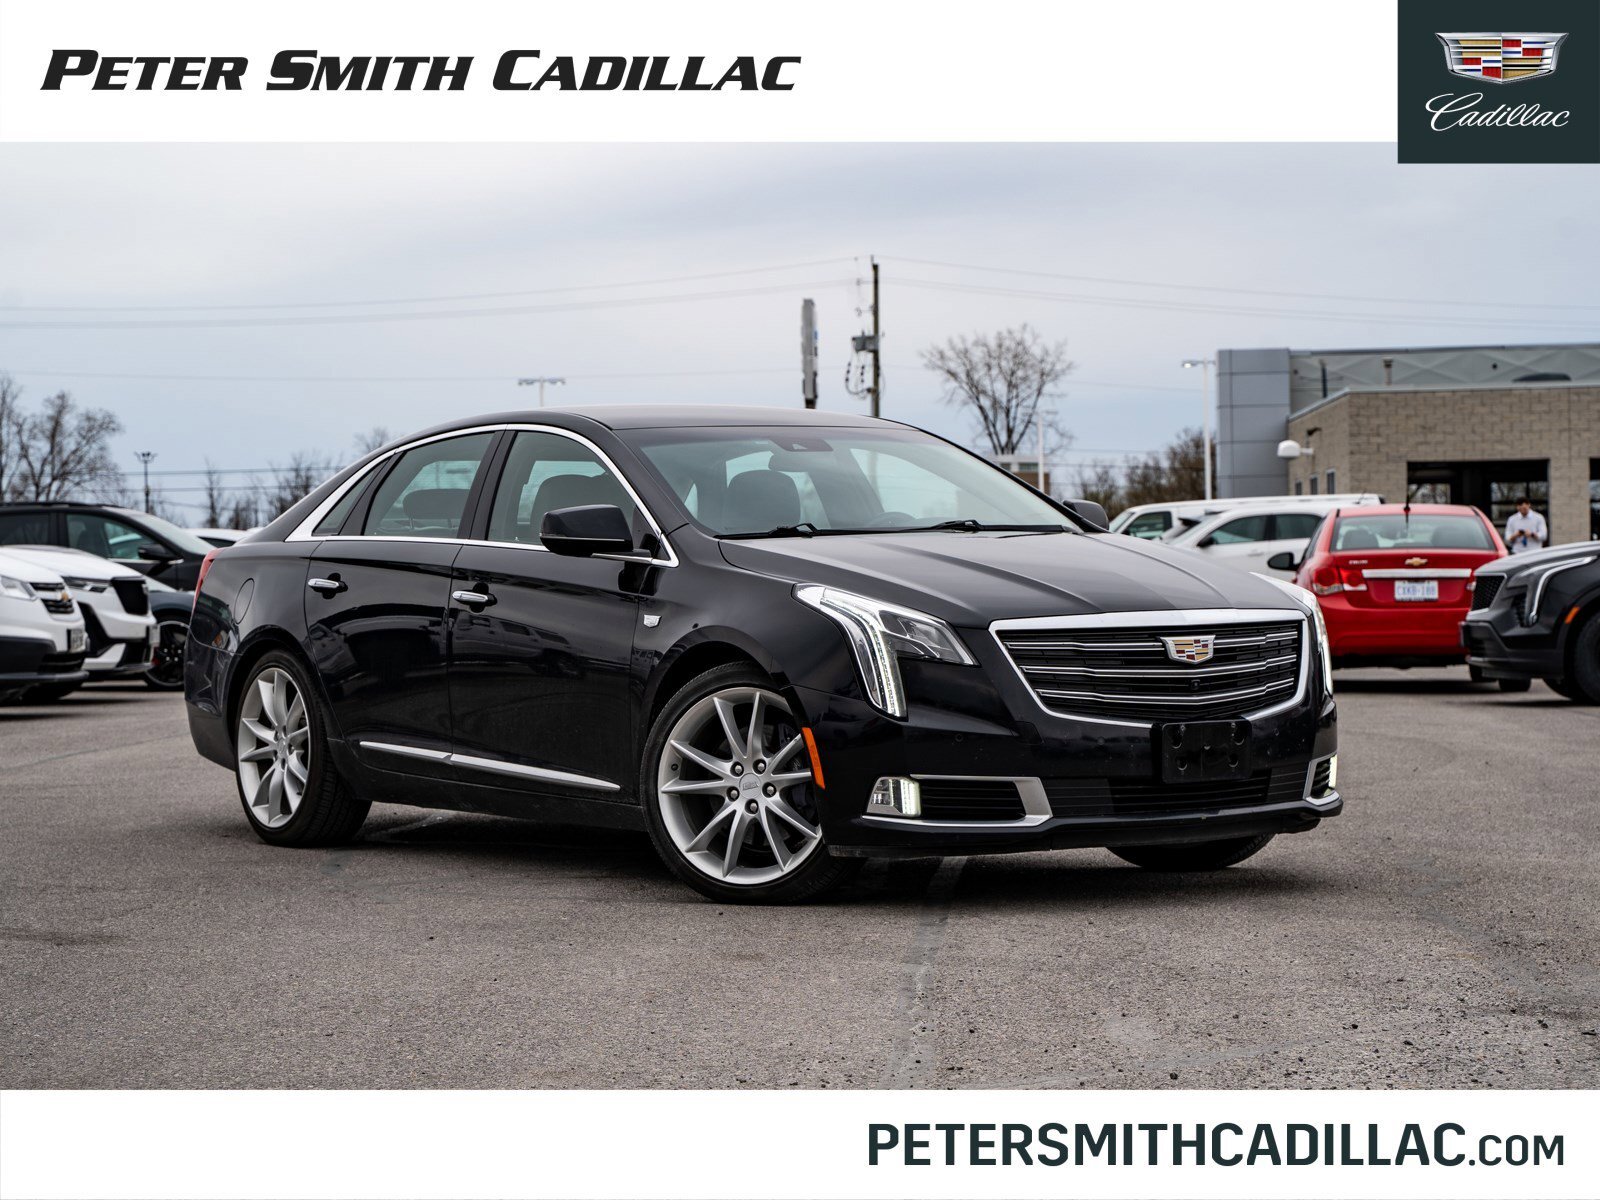 2018 Cadillac XTS Premium Luxury - 3.6L V6 | Heated & Cooled Front S